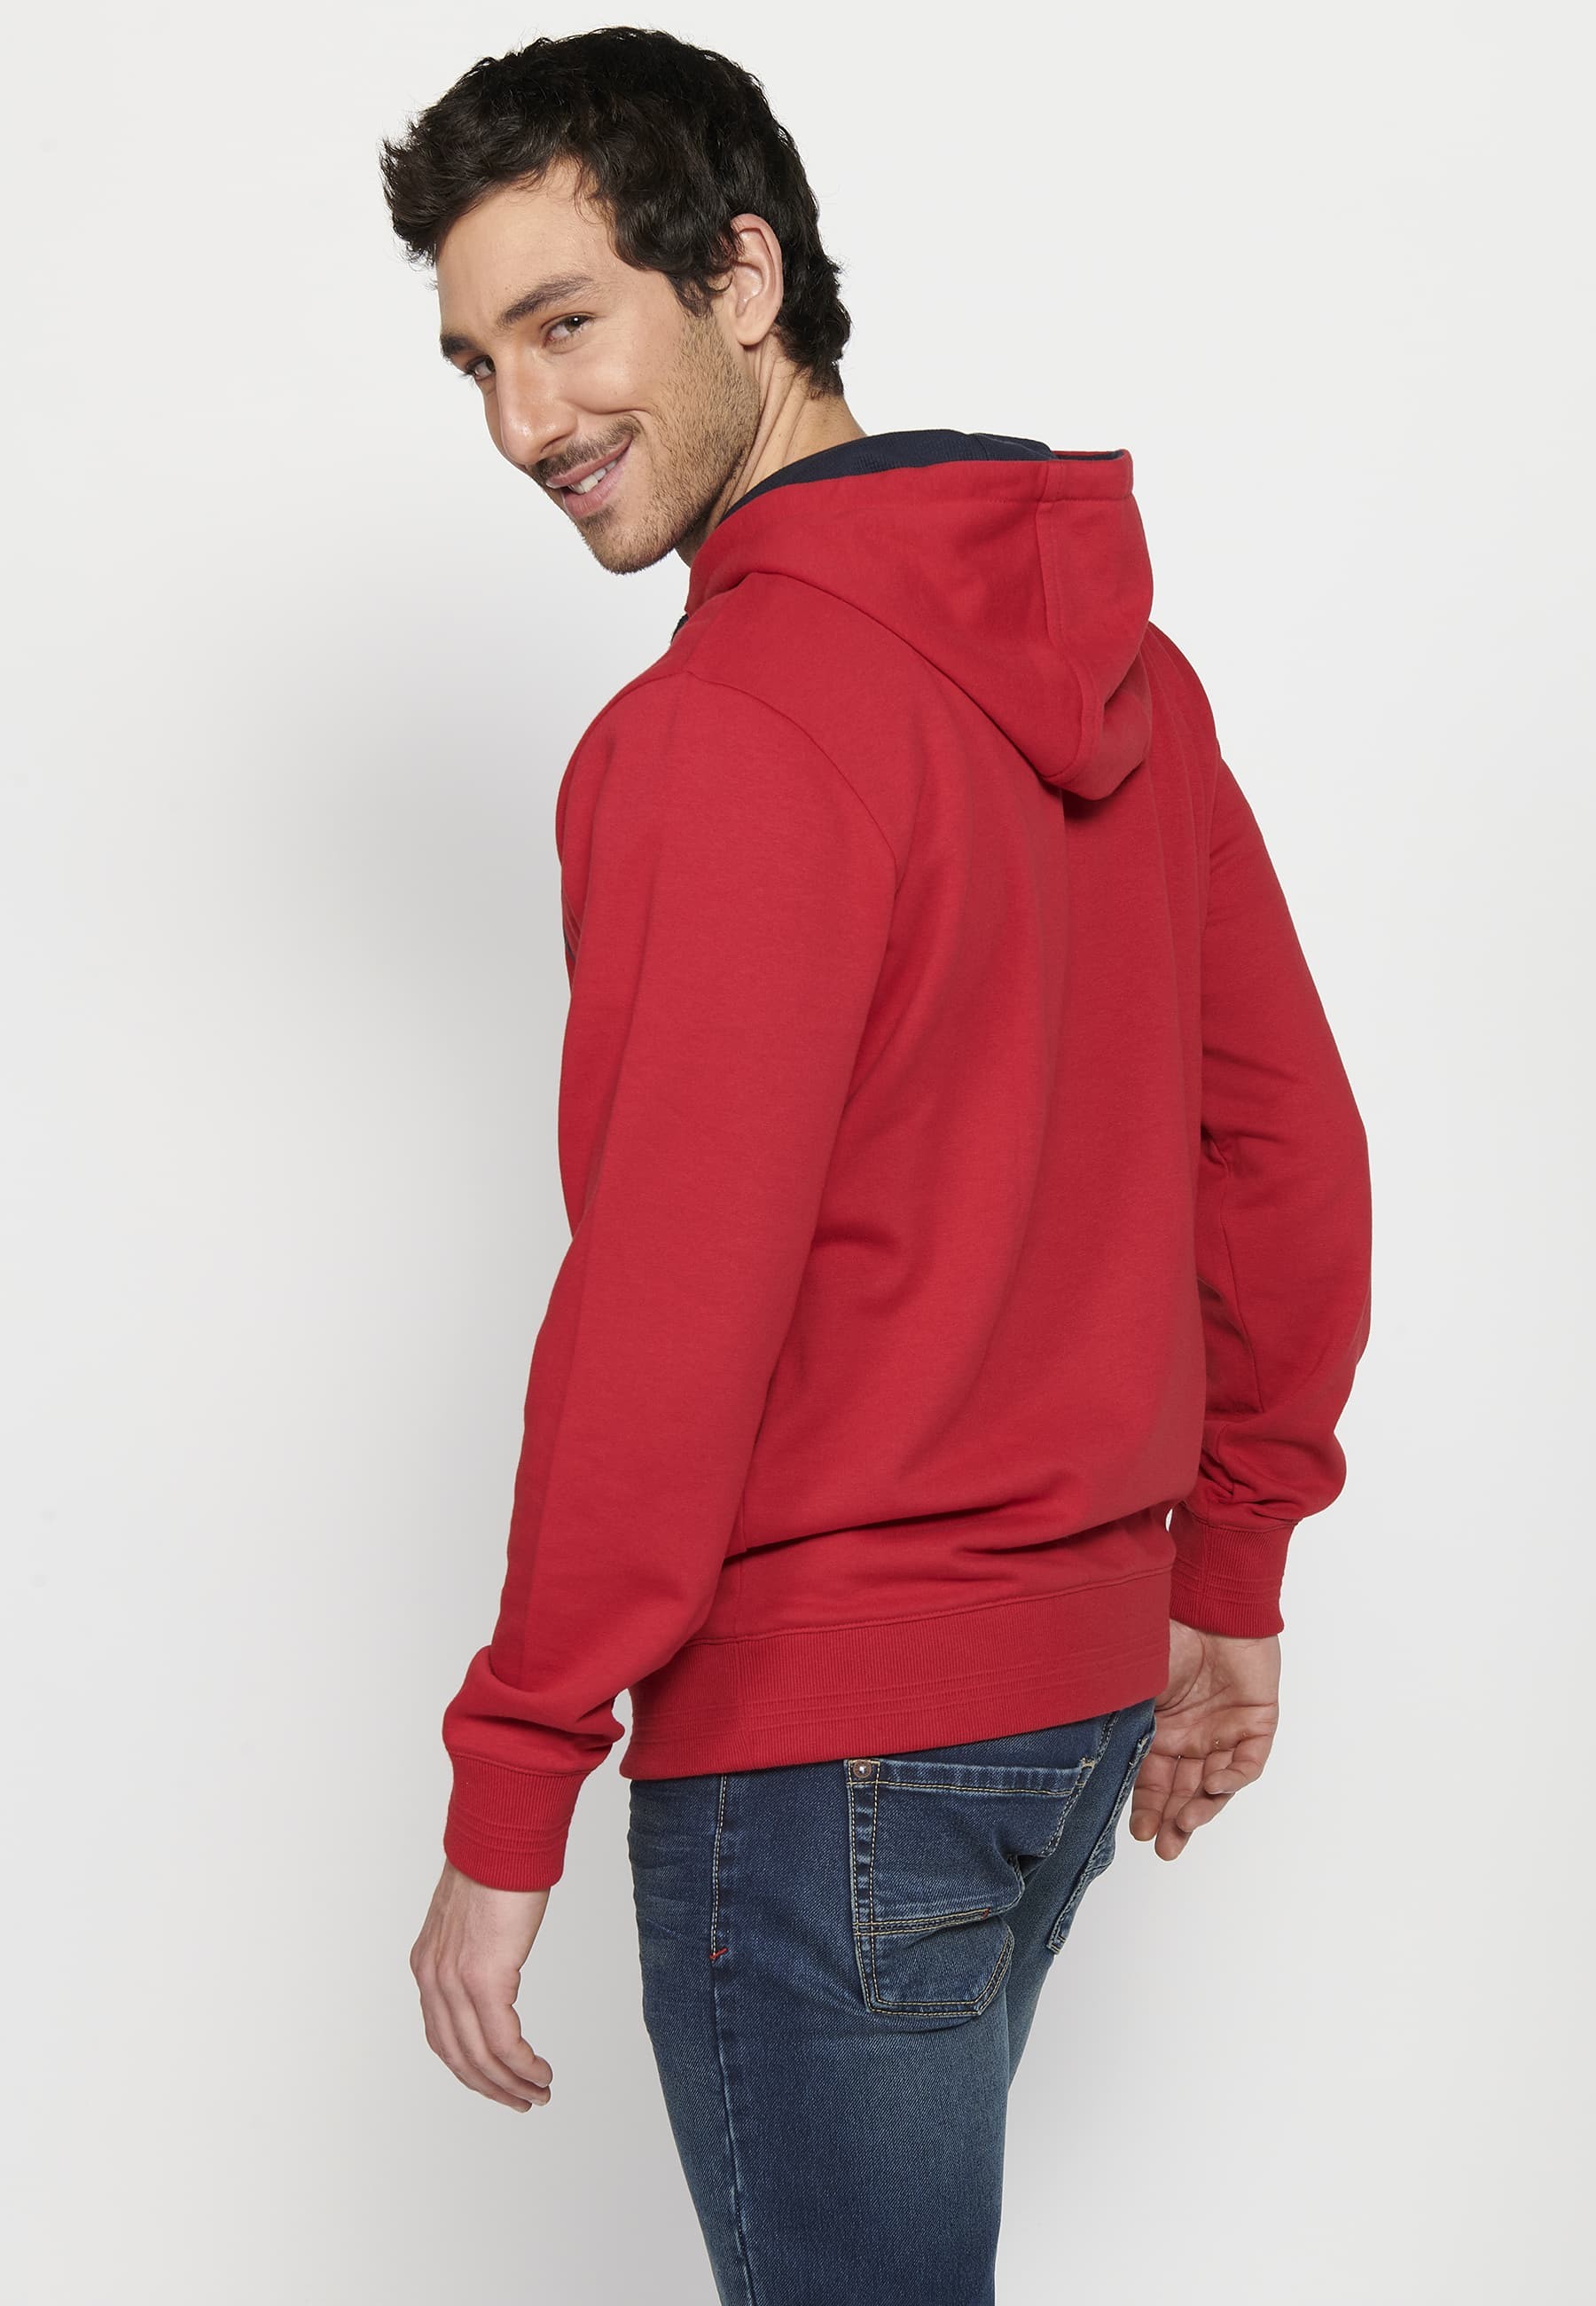 Men's Red Color Long Sleeve Hooded Sweatshirt with Front Embossed Detail 6